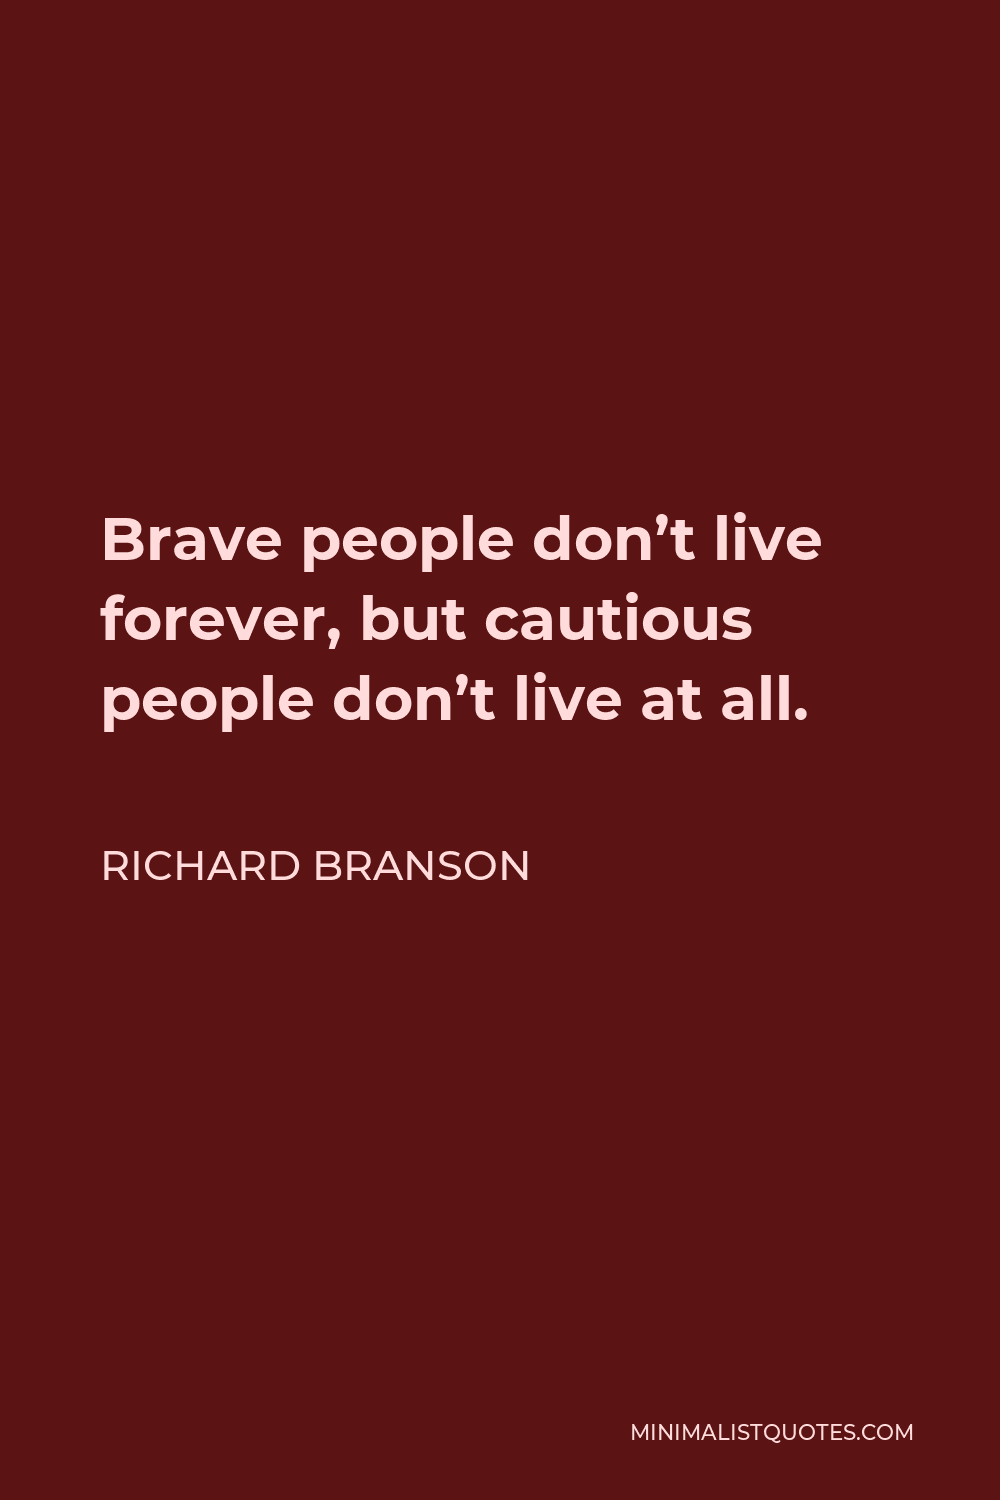 Richard Branson Quote - Brave people don’t live forever, but cautious people don’t live at all.